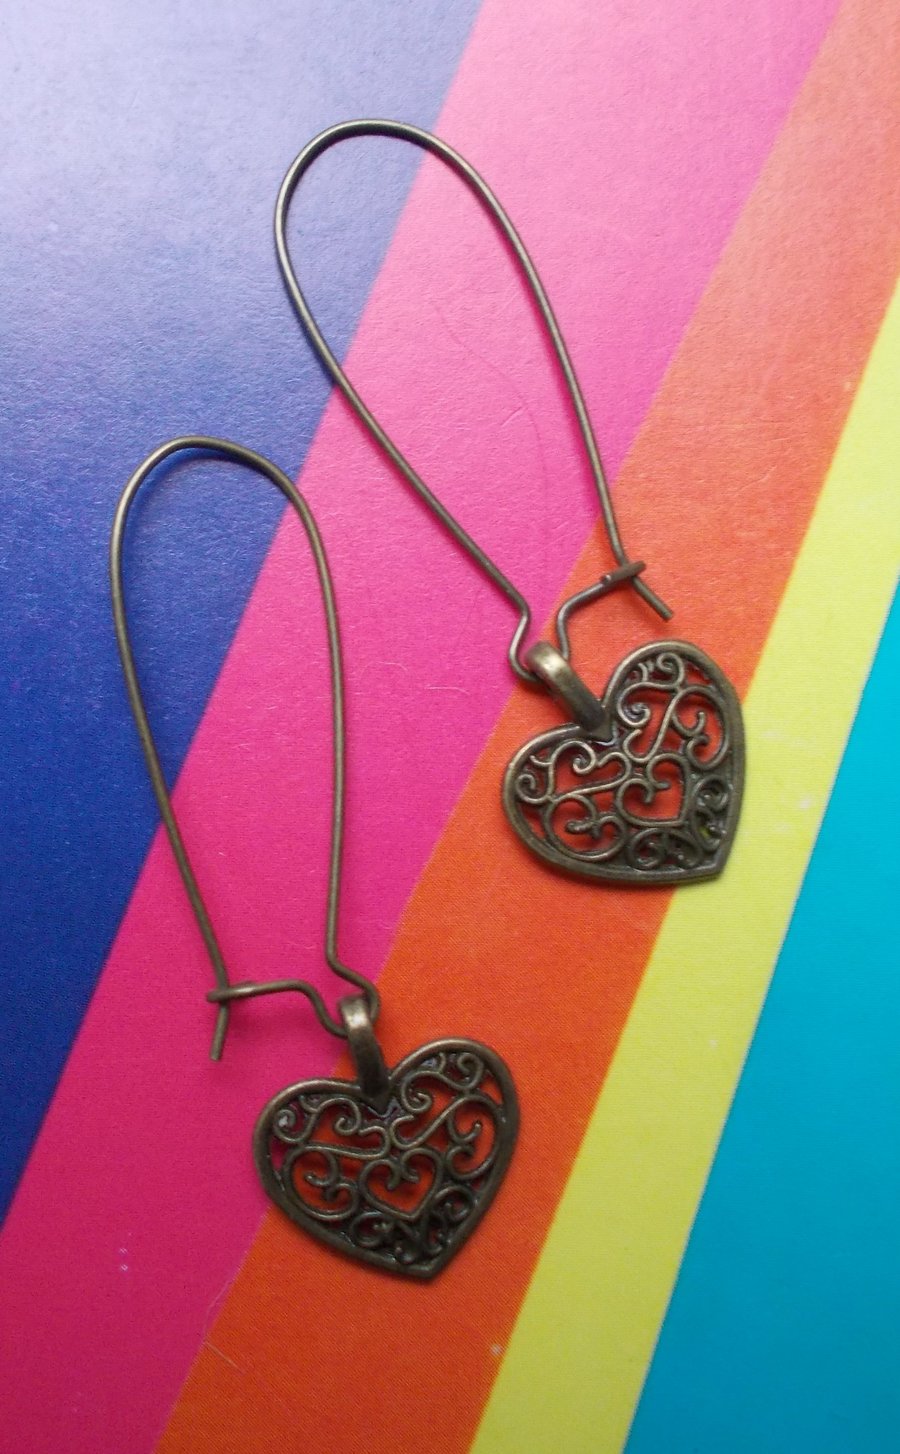 Antique Gold Style Filigree Heart Earrings with Hoop and Hooks